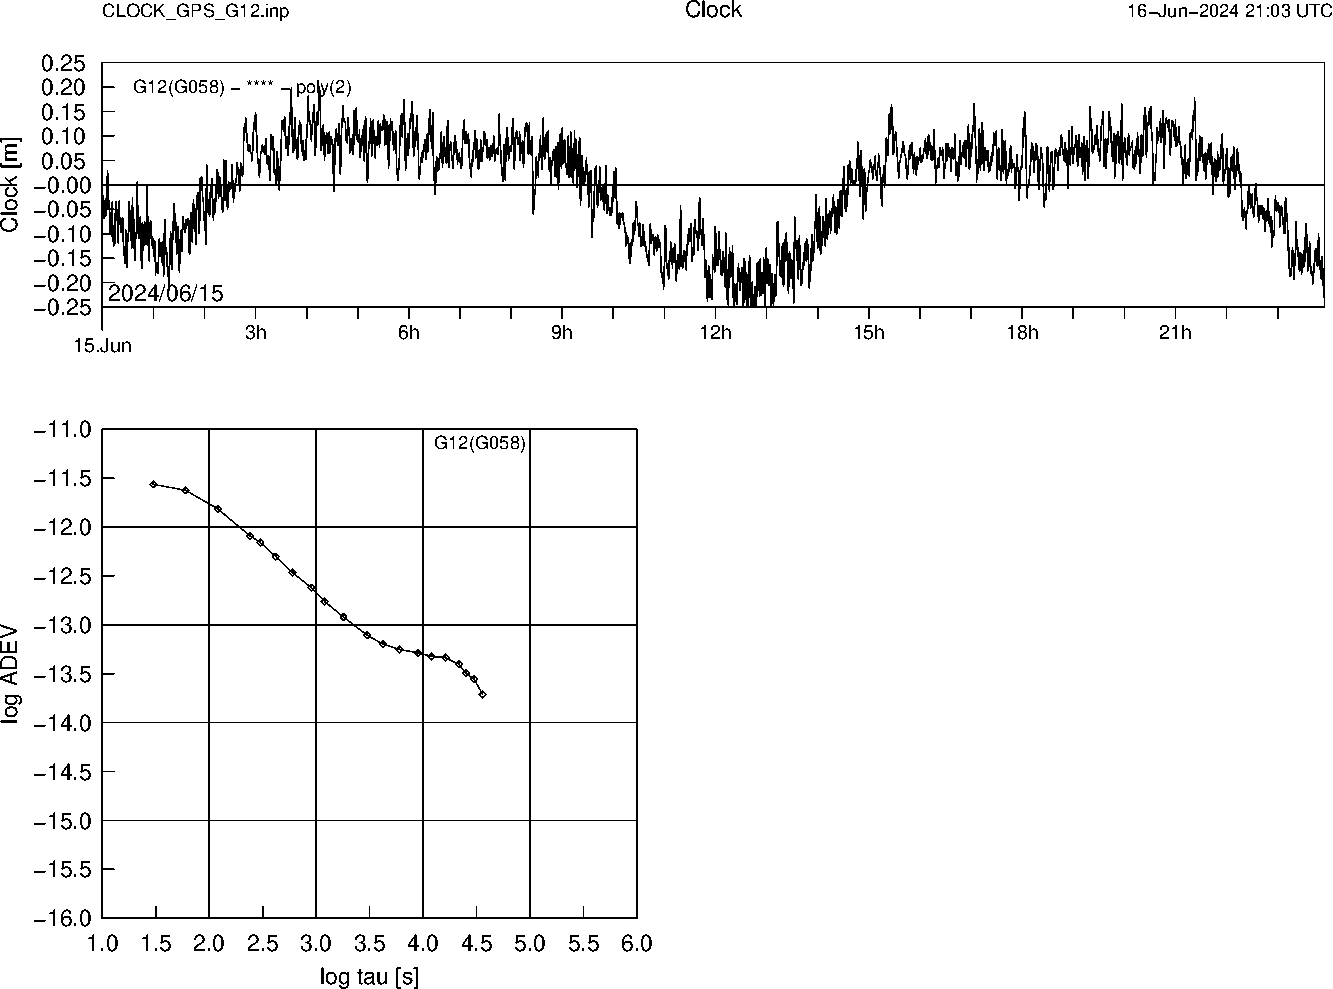 GPS G12 Clock Time Series and Allan Deviation